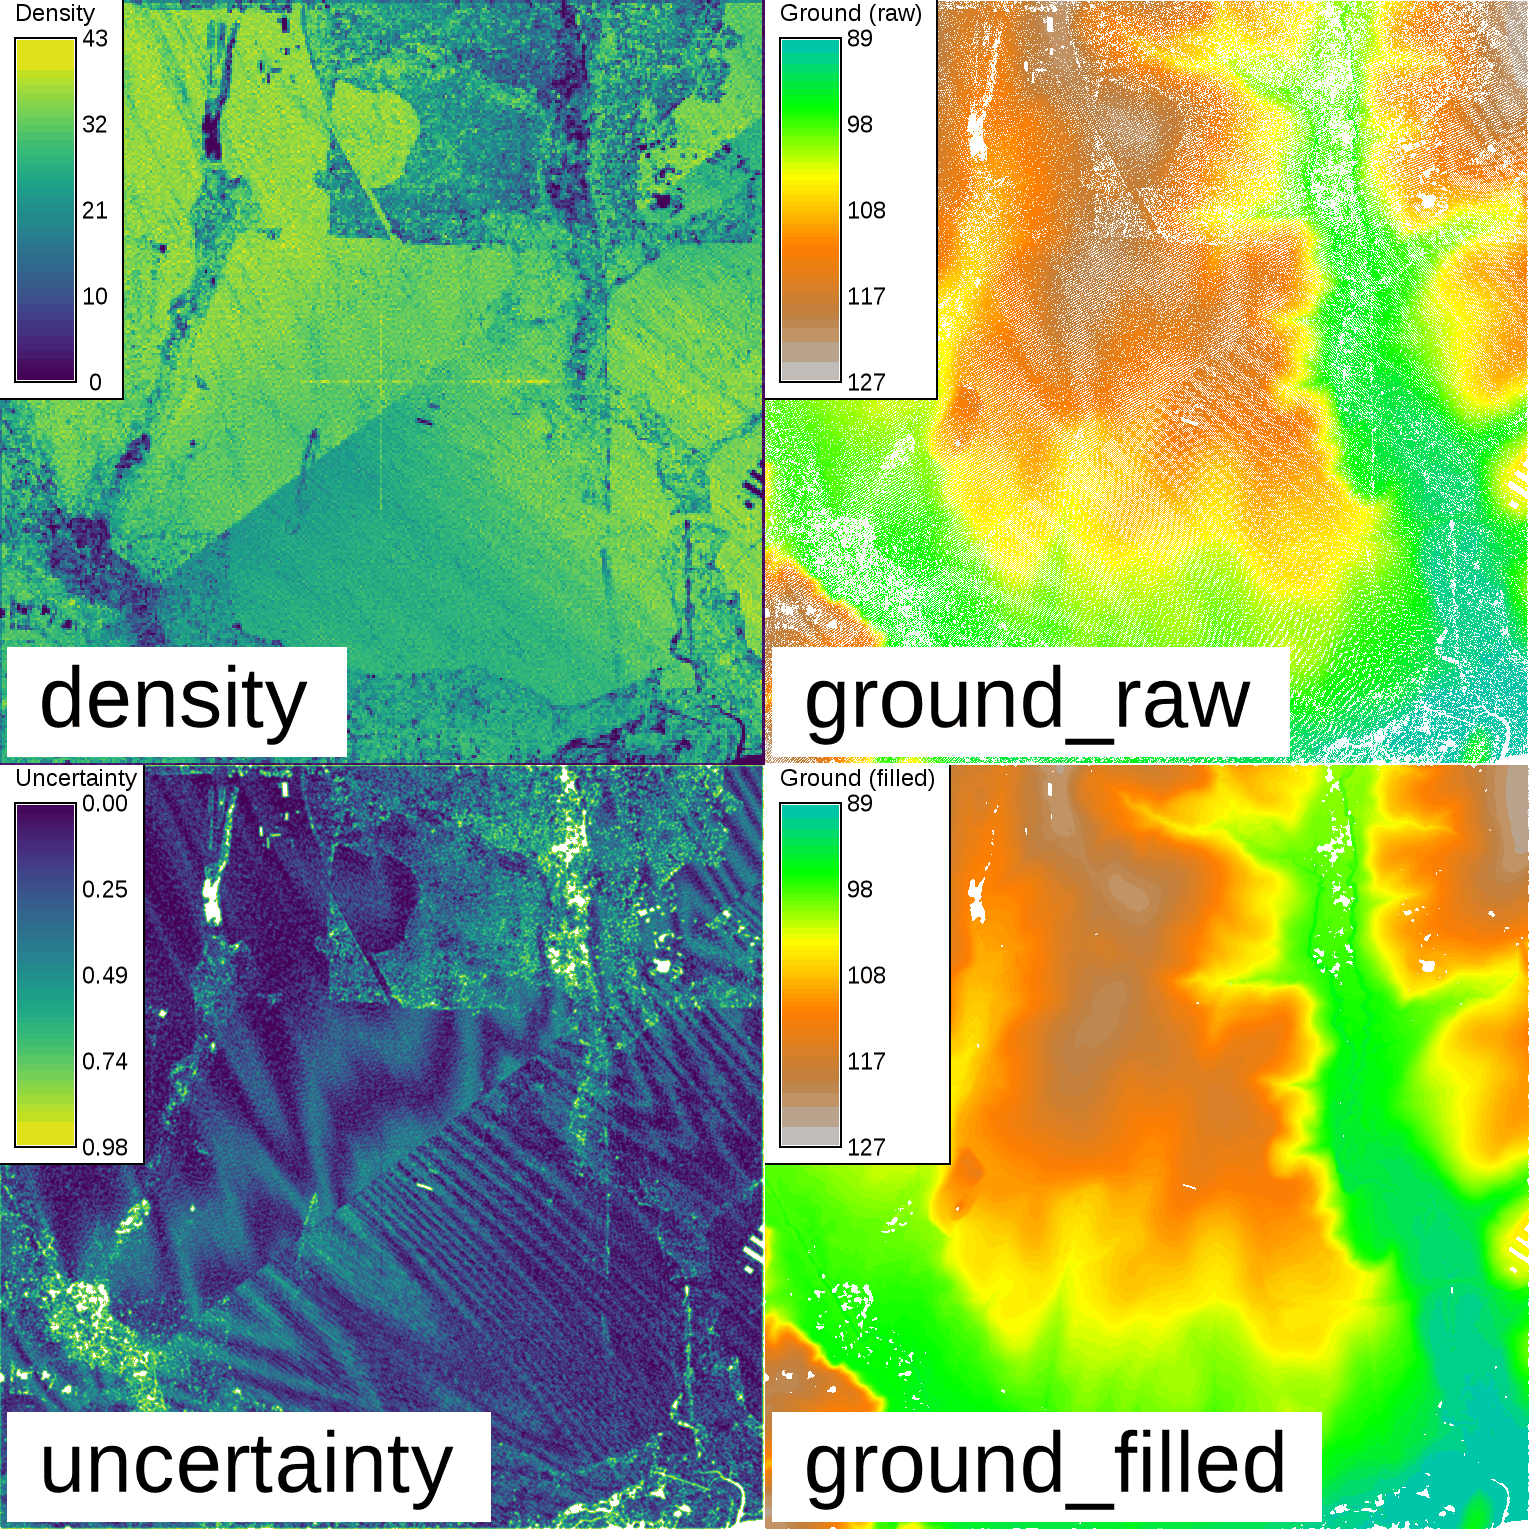 Point density and ground surface